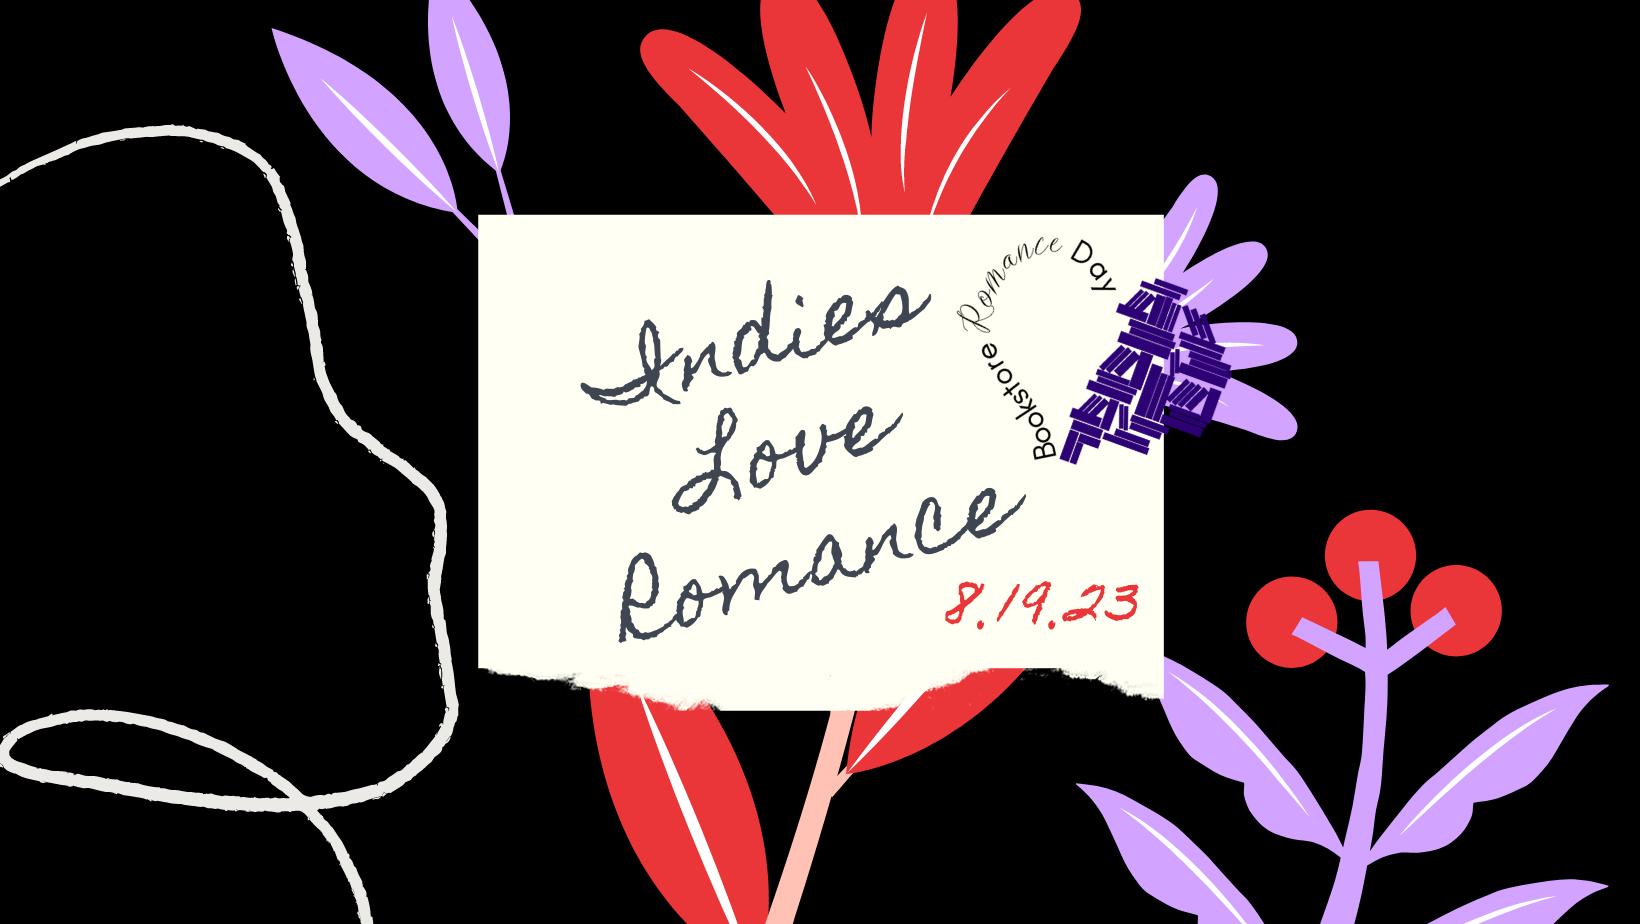 Bookstore Romance Day graphic, "Indies Love Romance, 8.19.23" on a floral background.